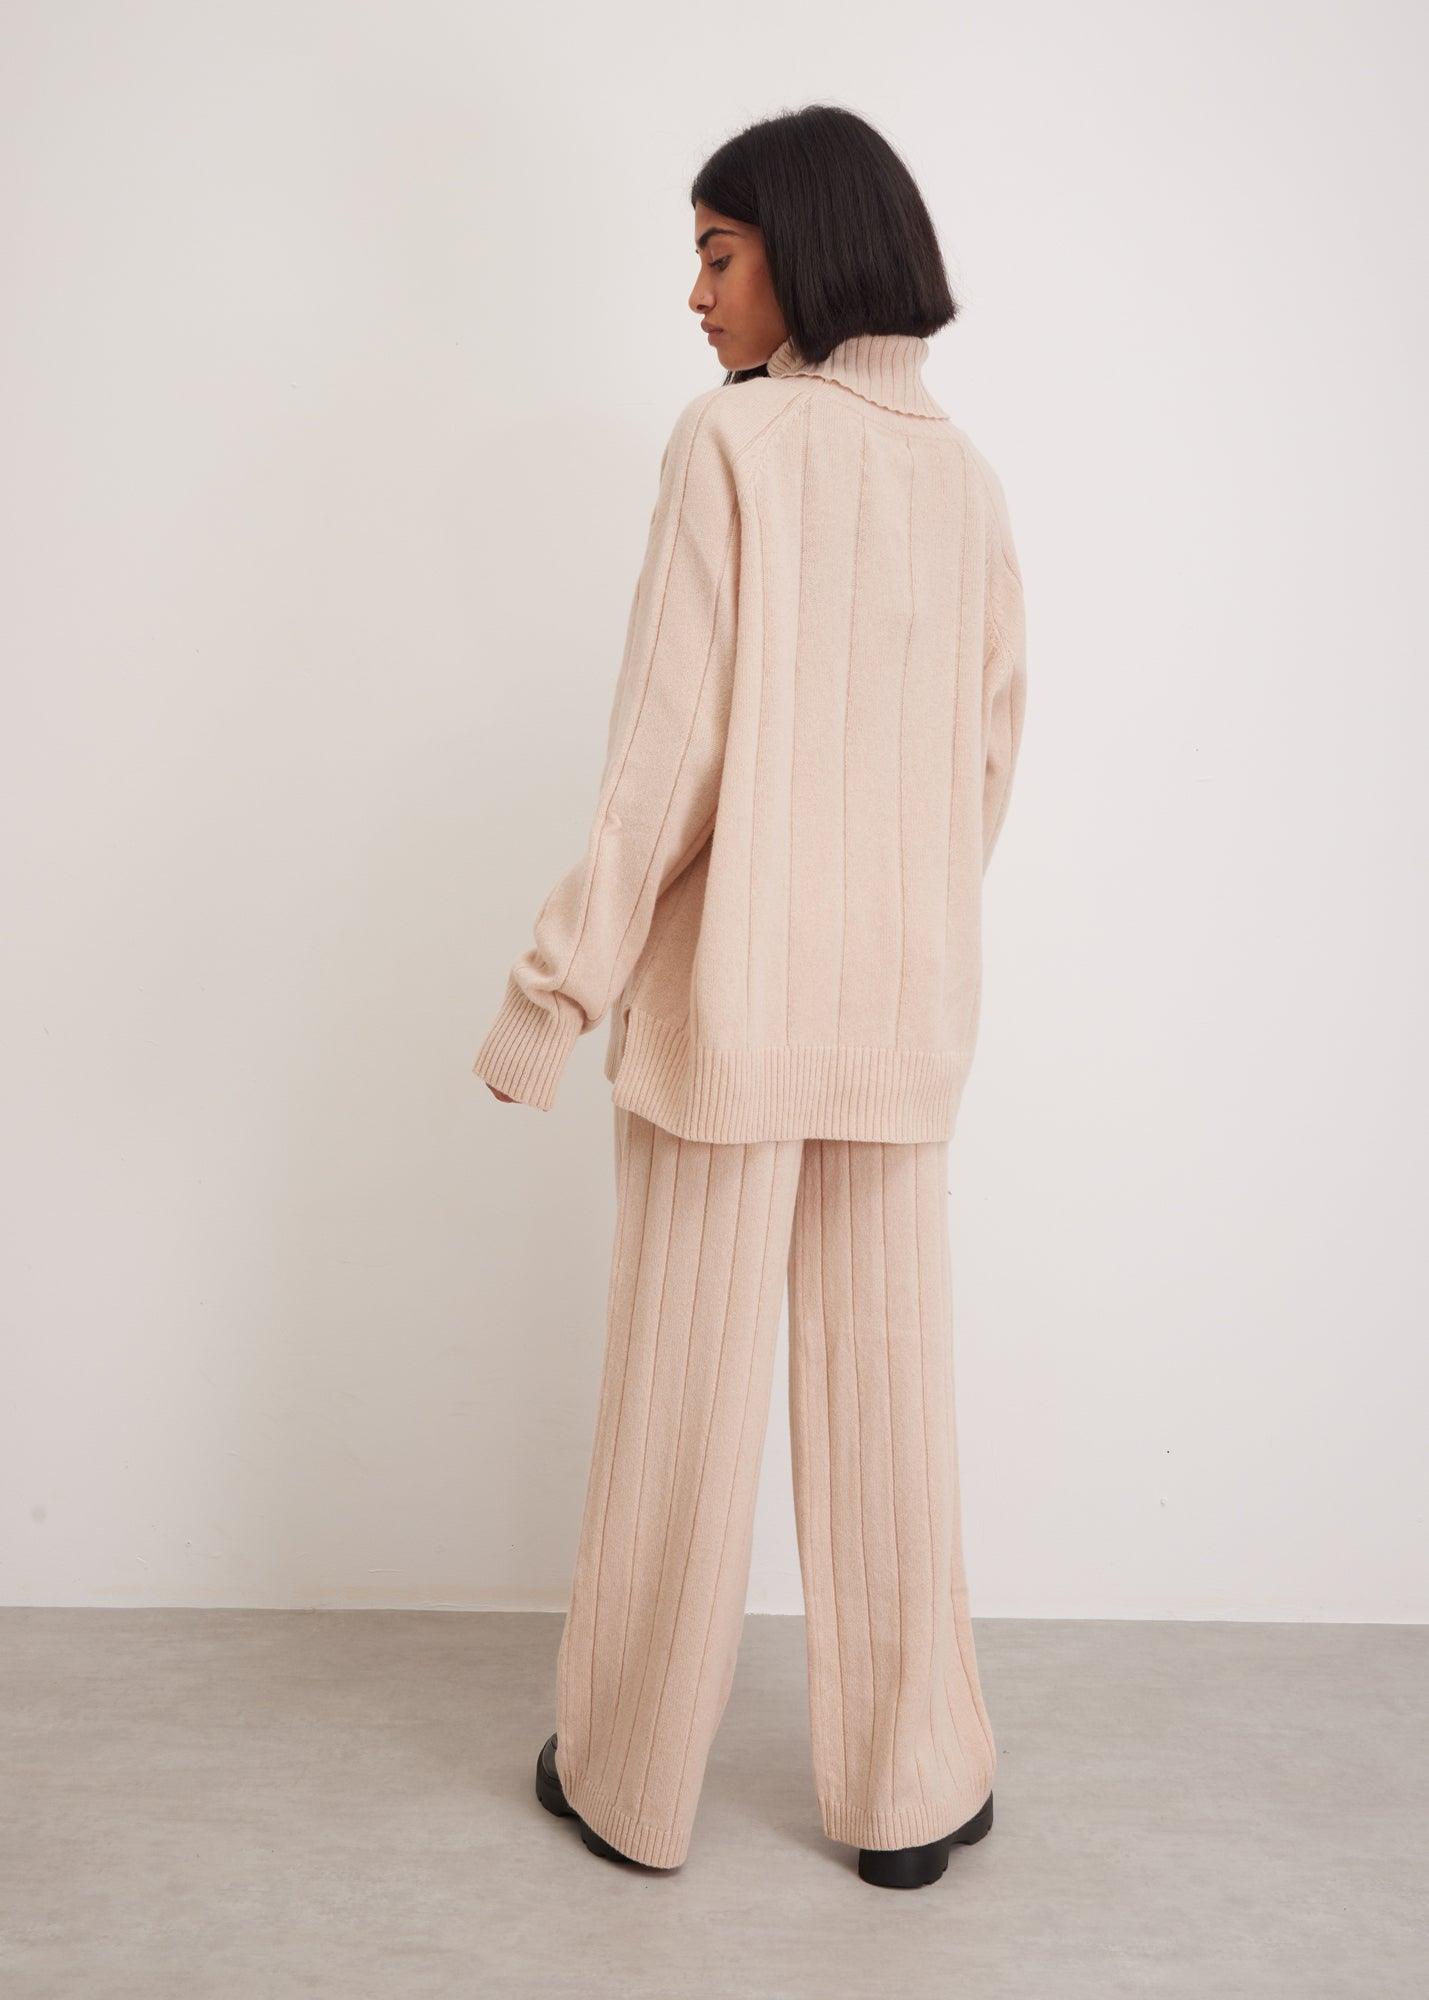 Milky Wool Set | Sweater and Trousers Set